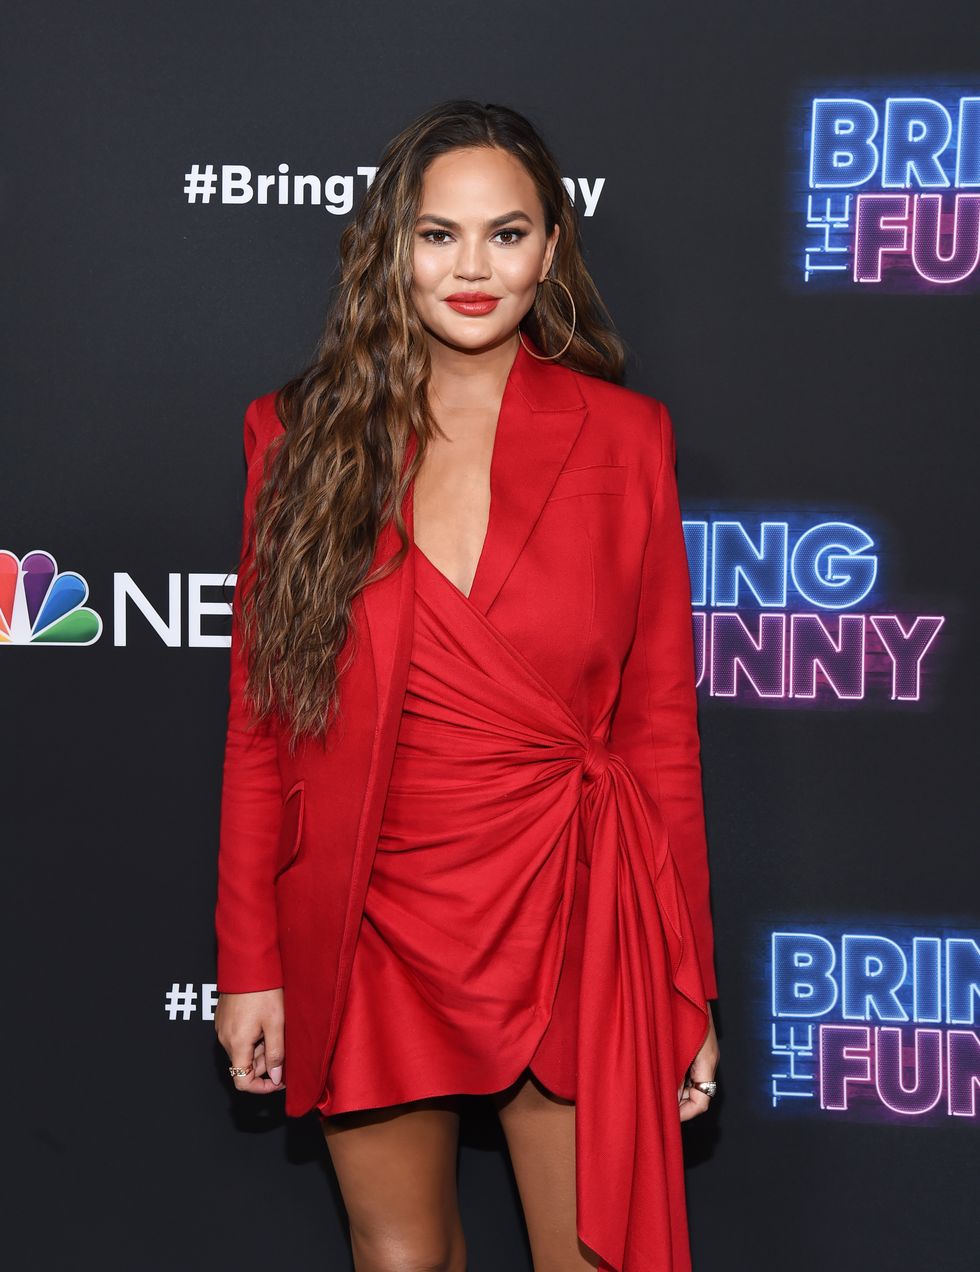 premiere of nbc's "bring the funny"   arrivals